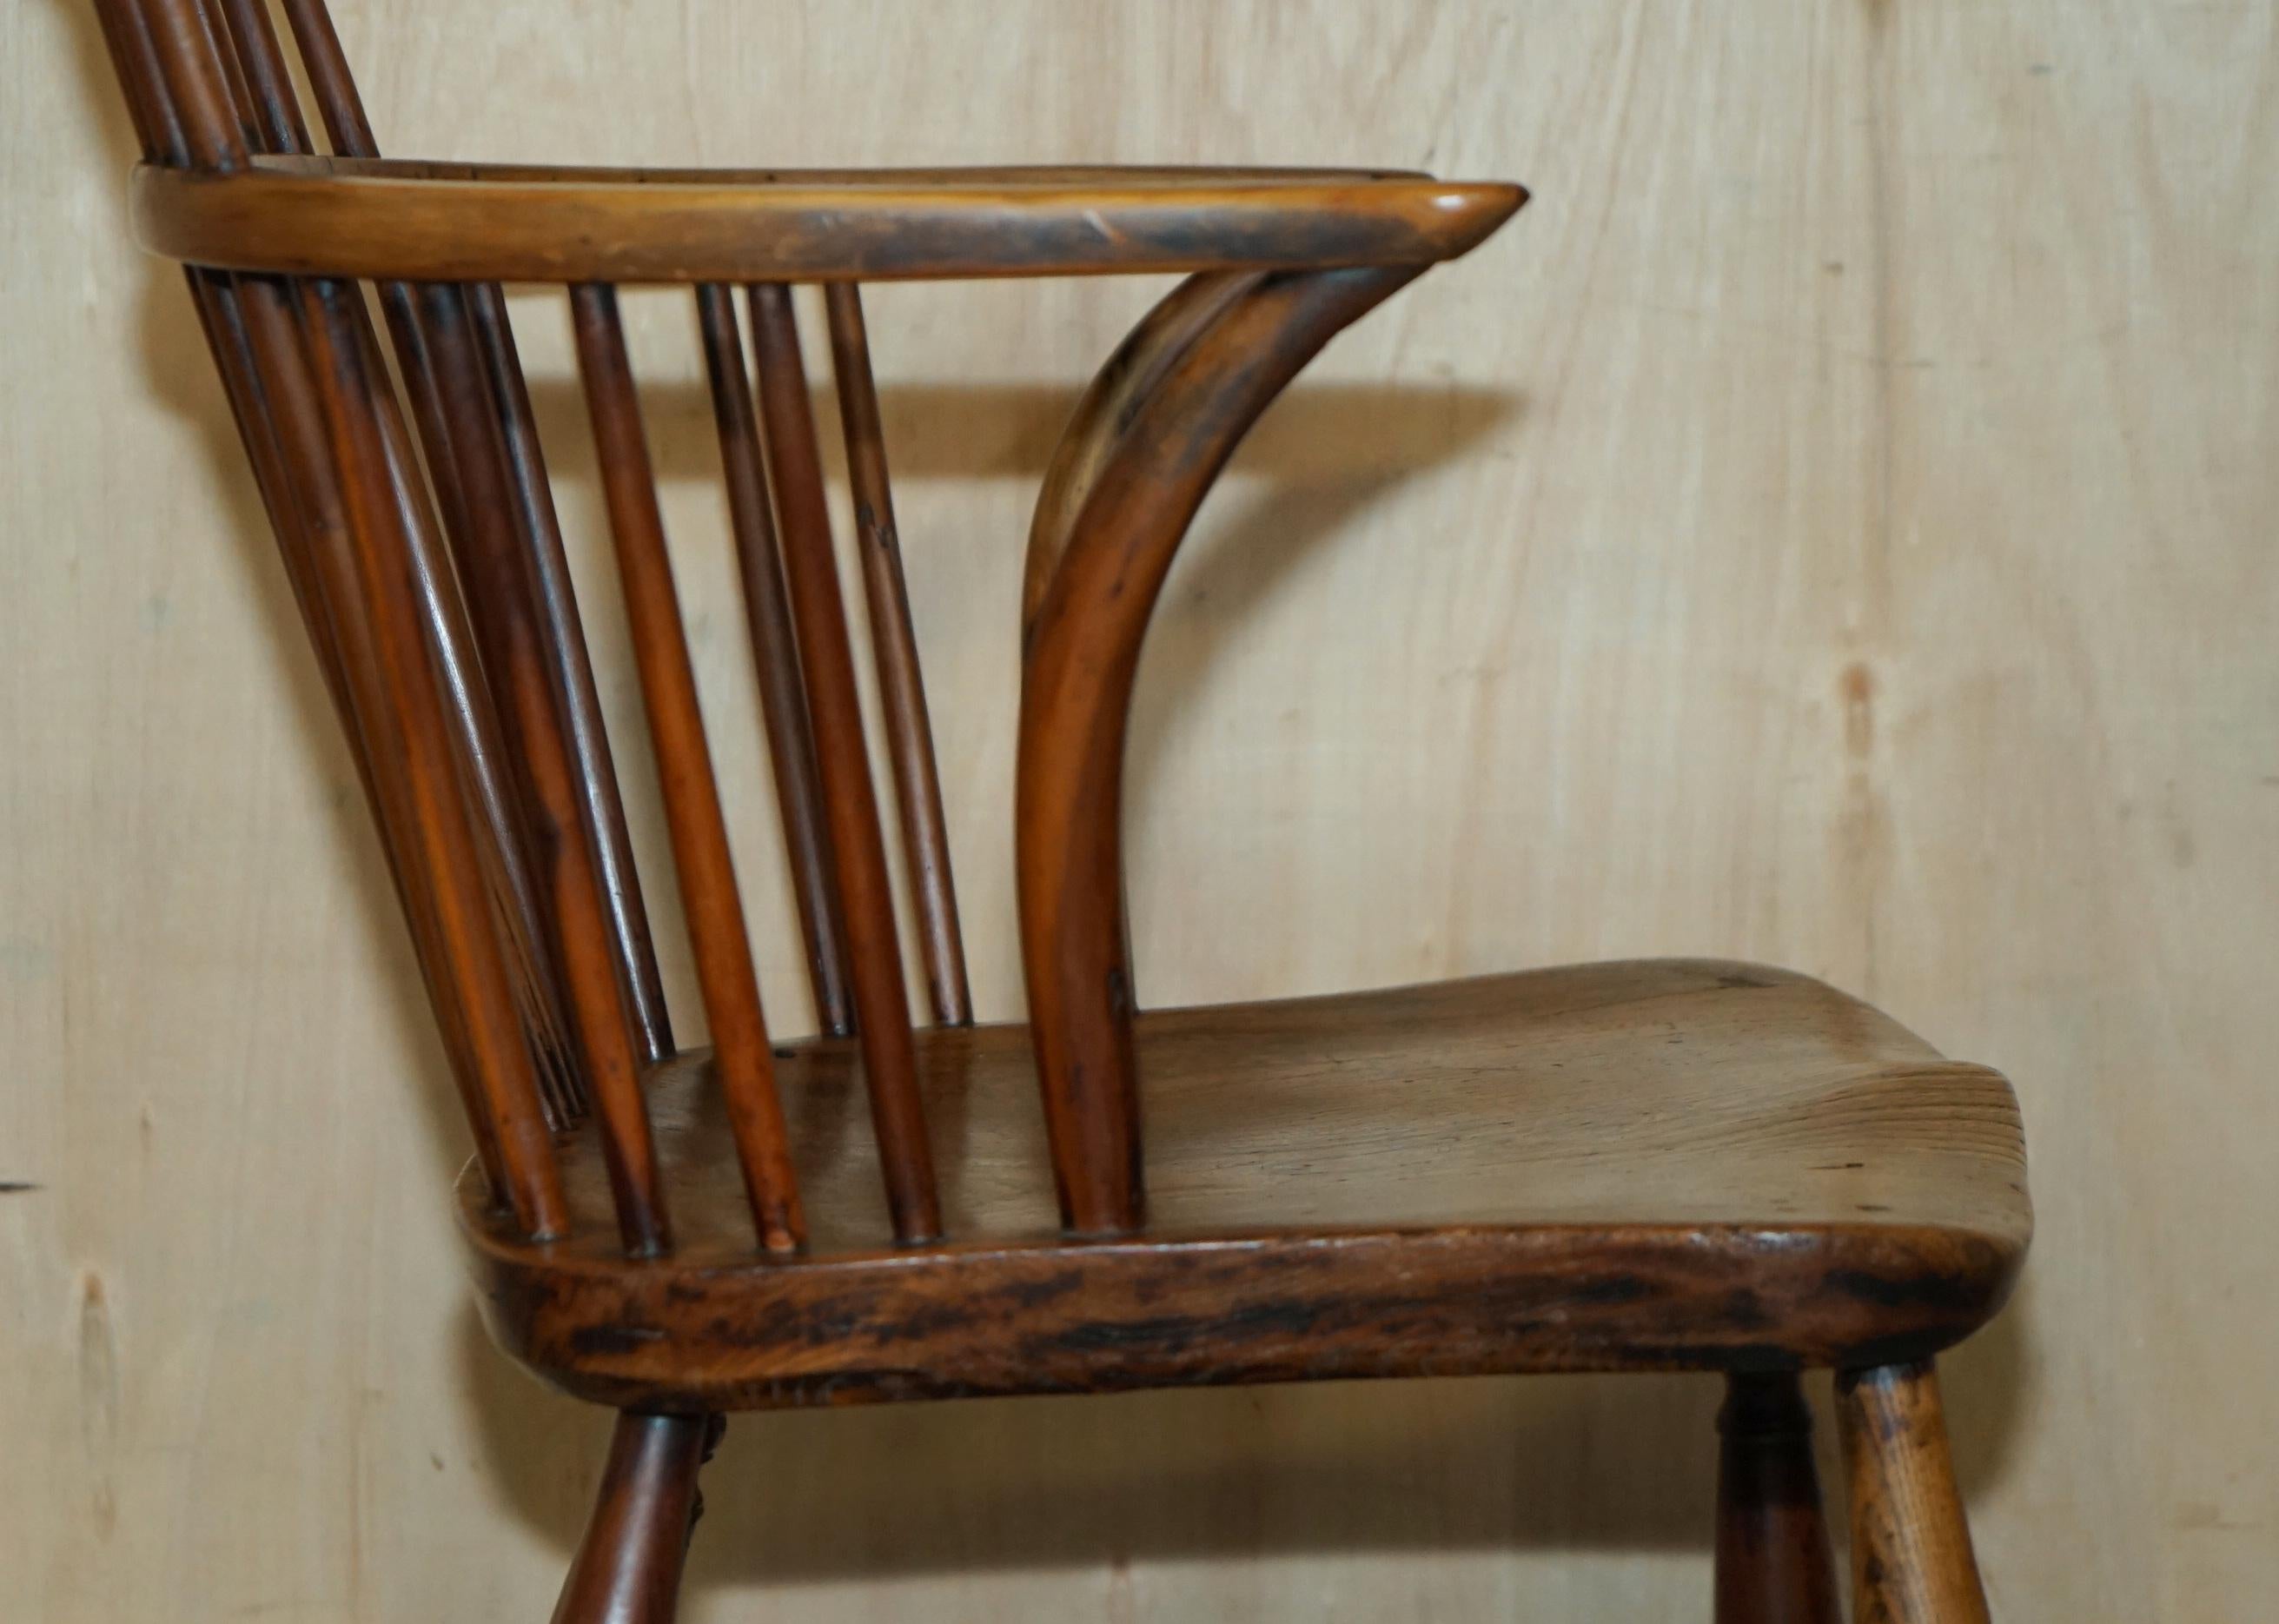 FINE ANTiQUE EARLY 19TH CENTURY BURR YEW WOOD & ELM COMB BACK WINDSOR ARMCHAIR For Sale 5